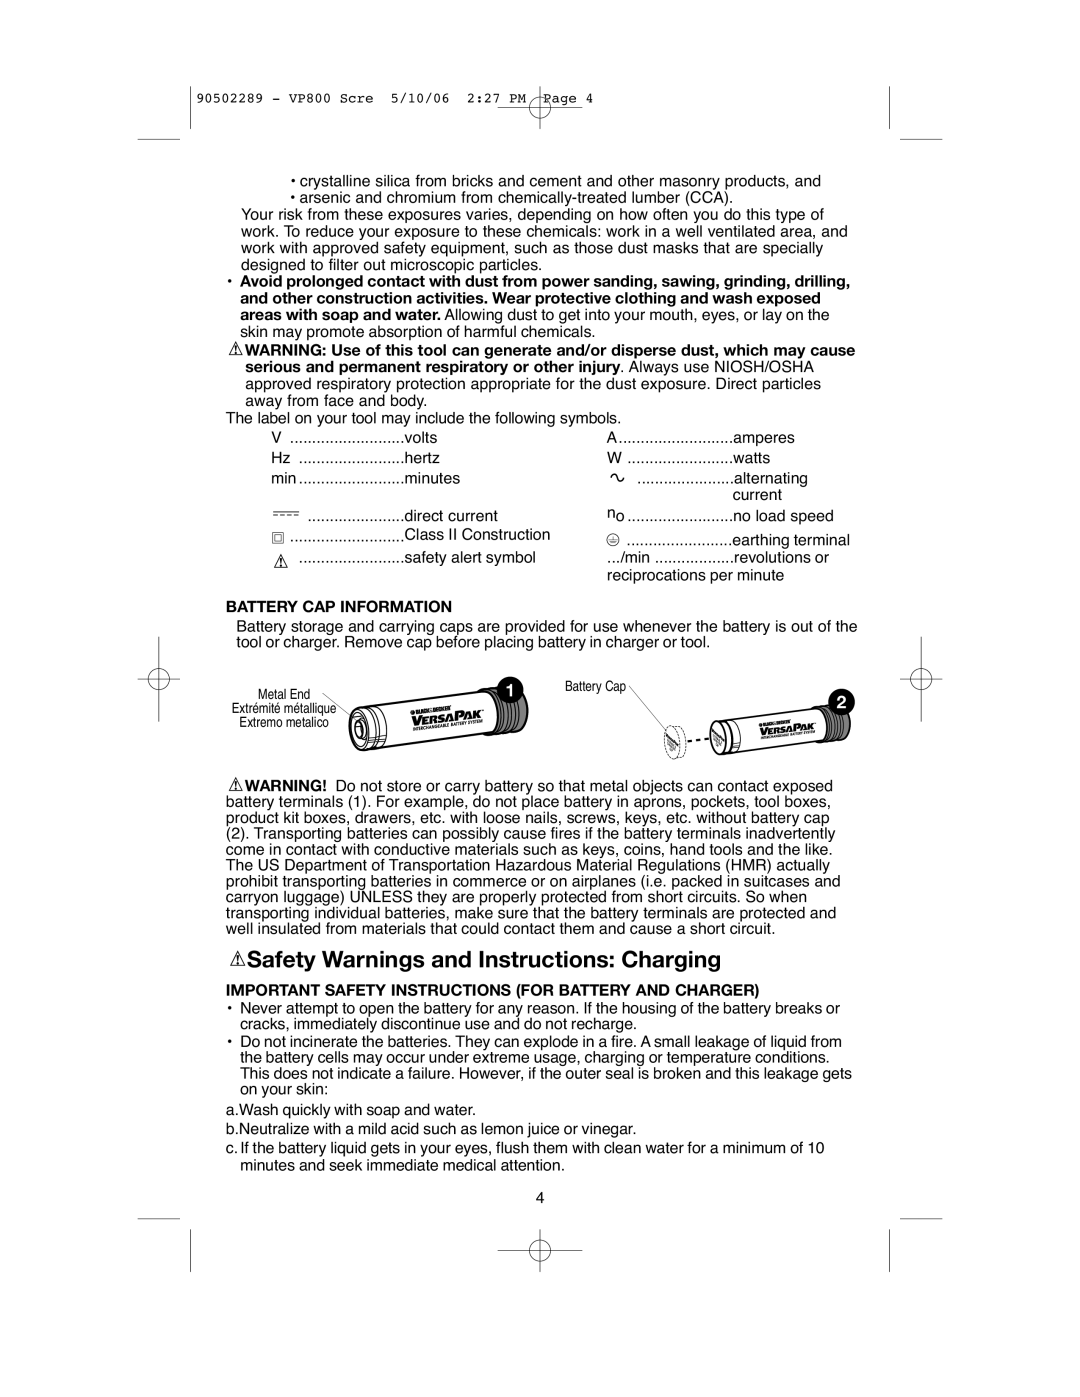 Black & Decker VP800 instruction manual Safety Warnings and Instructions Charging, Battery Cap Information 